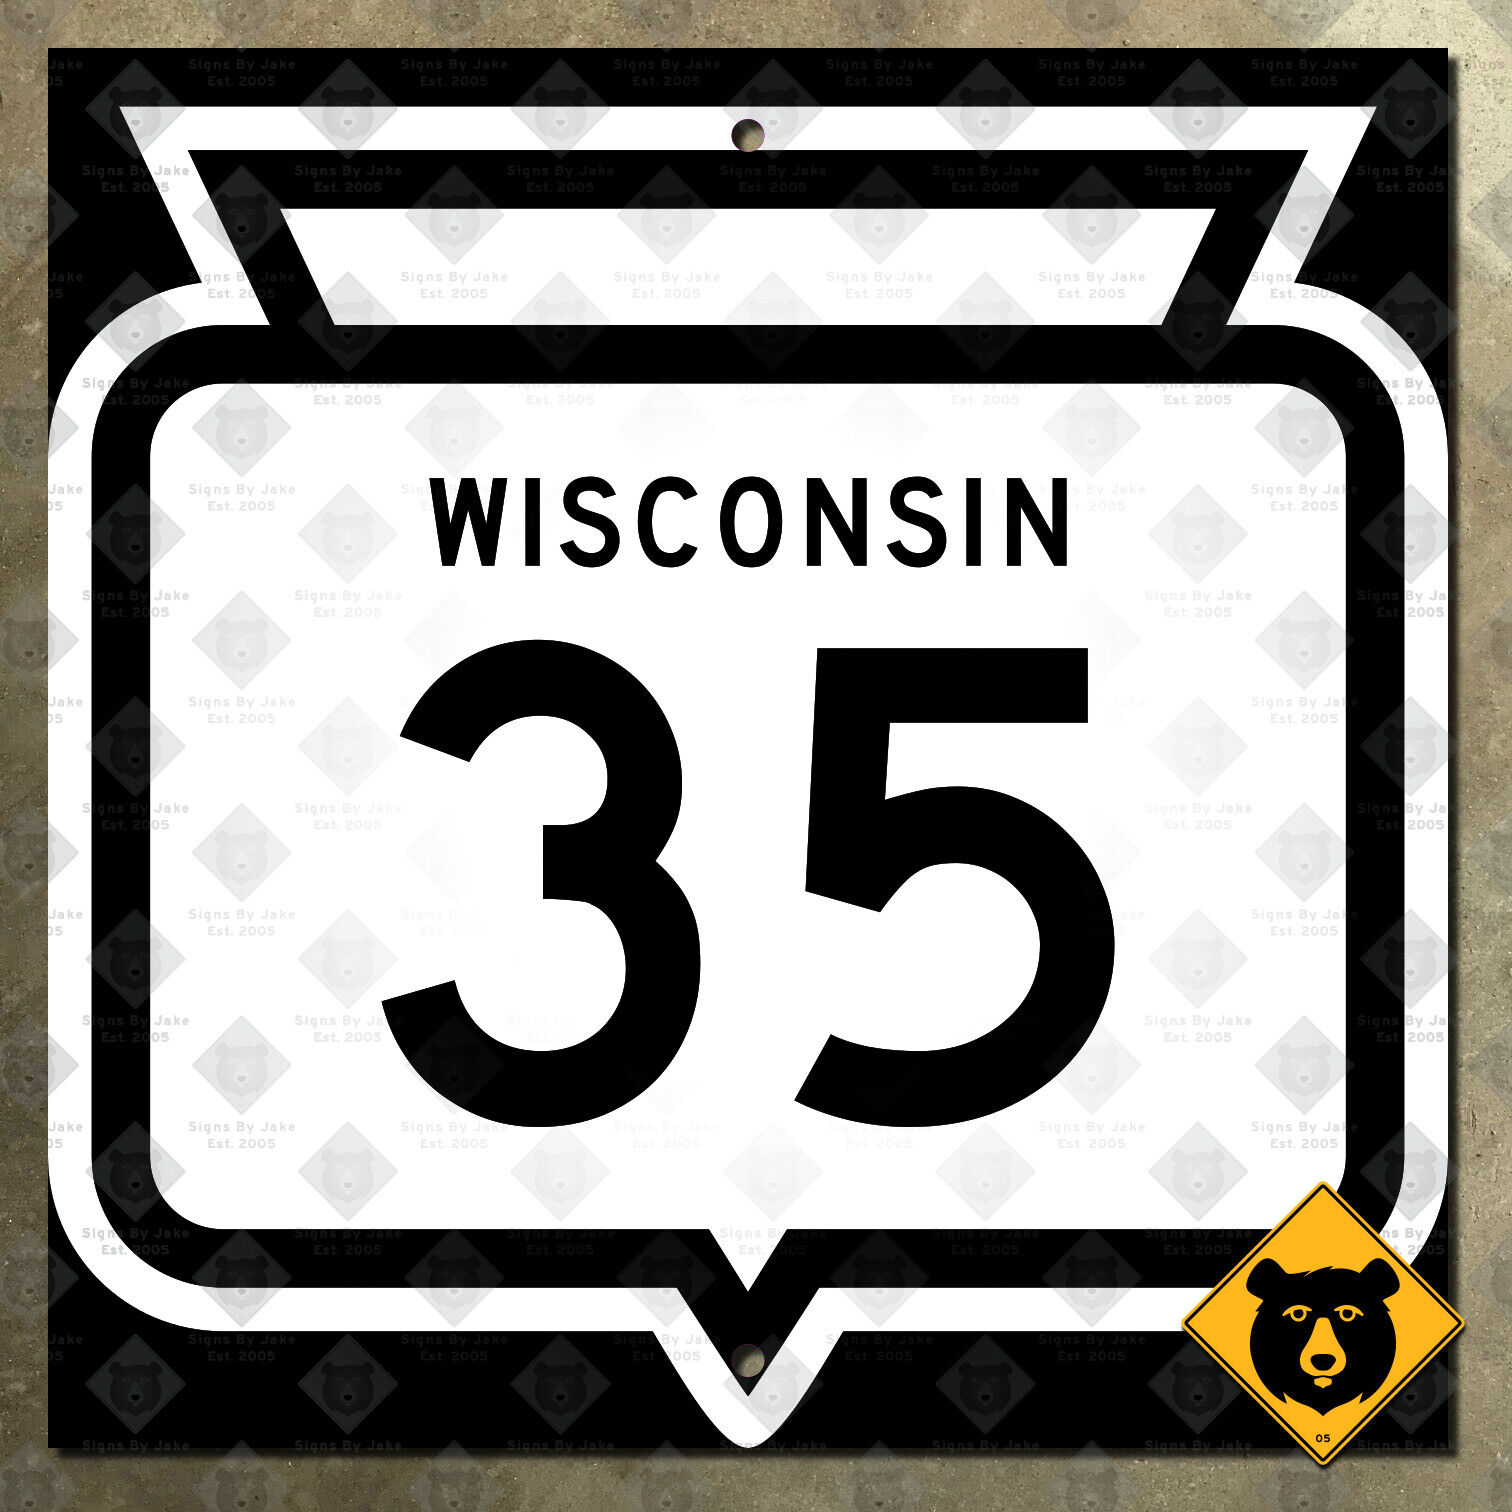 Wisconsin state highway 35 Great River Road Hudson route marker sign 12x12